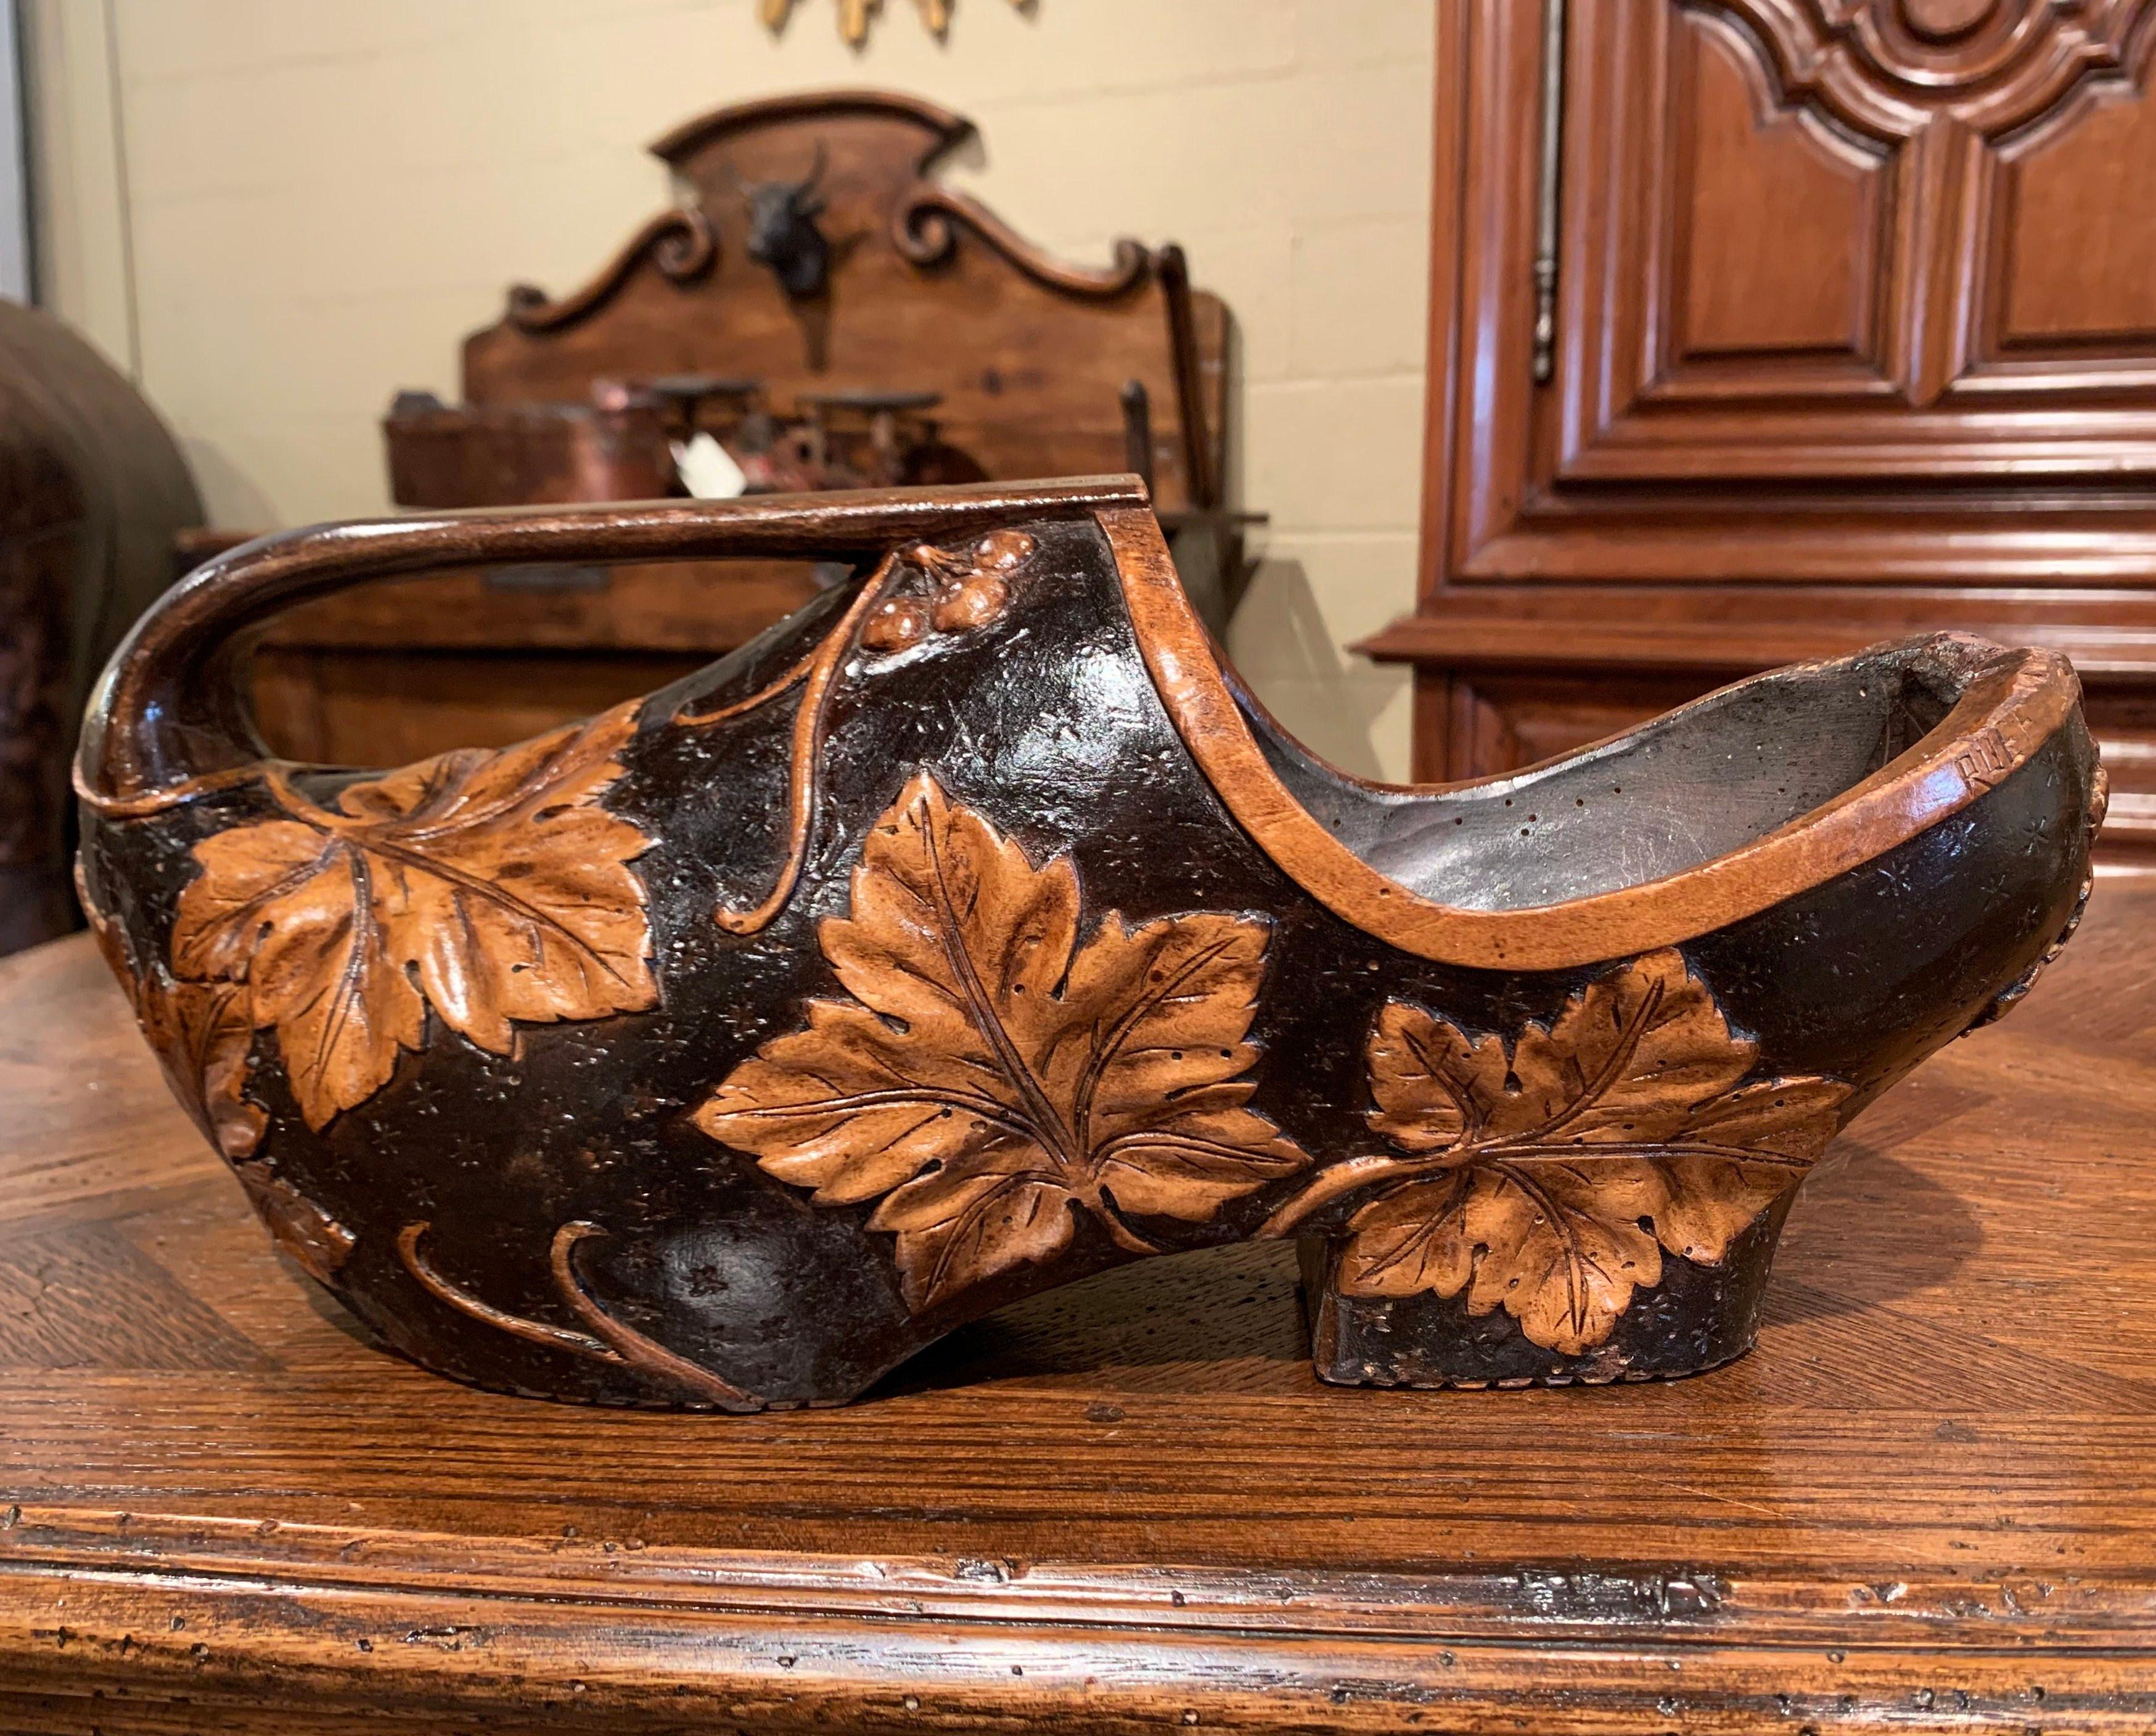 Early 20th Century French Carved Walnut Wine Bottle Holder Clog with Vine Decor In Excellent Condition For Sale In Dallas, TX